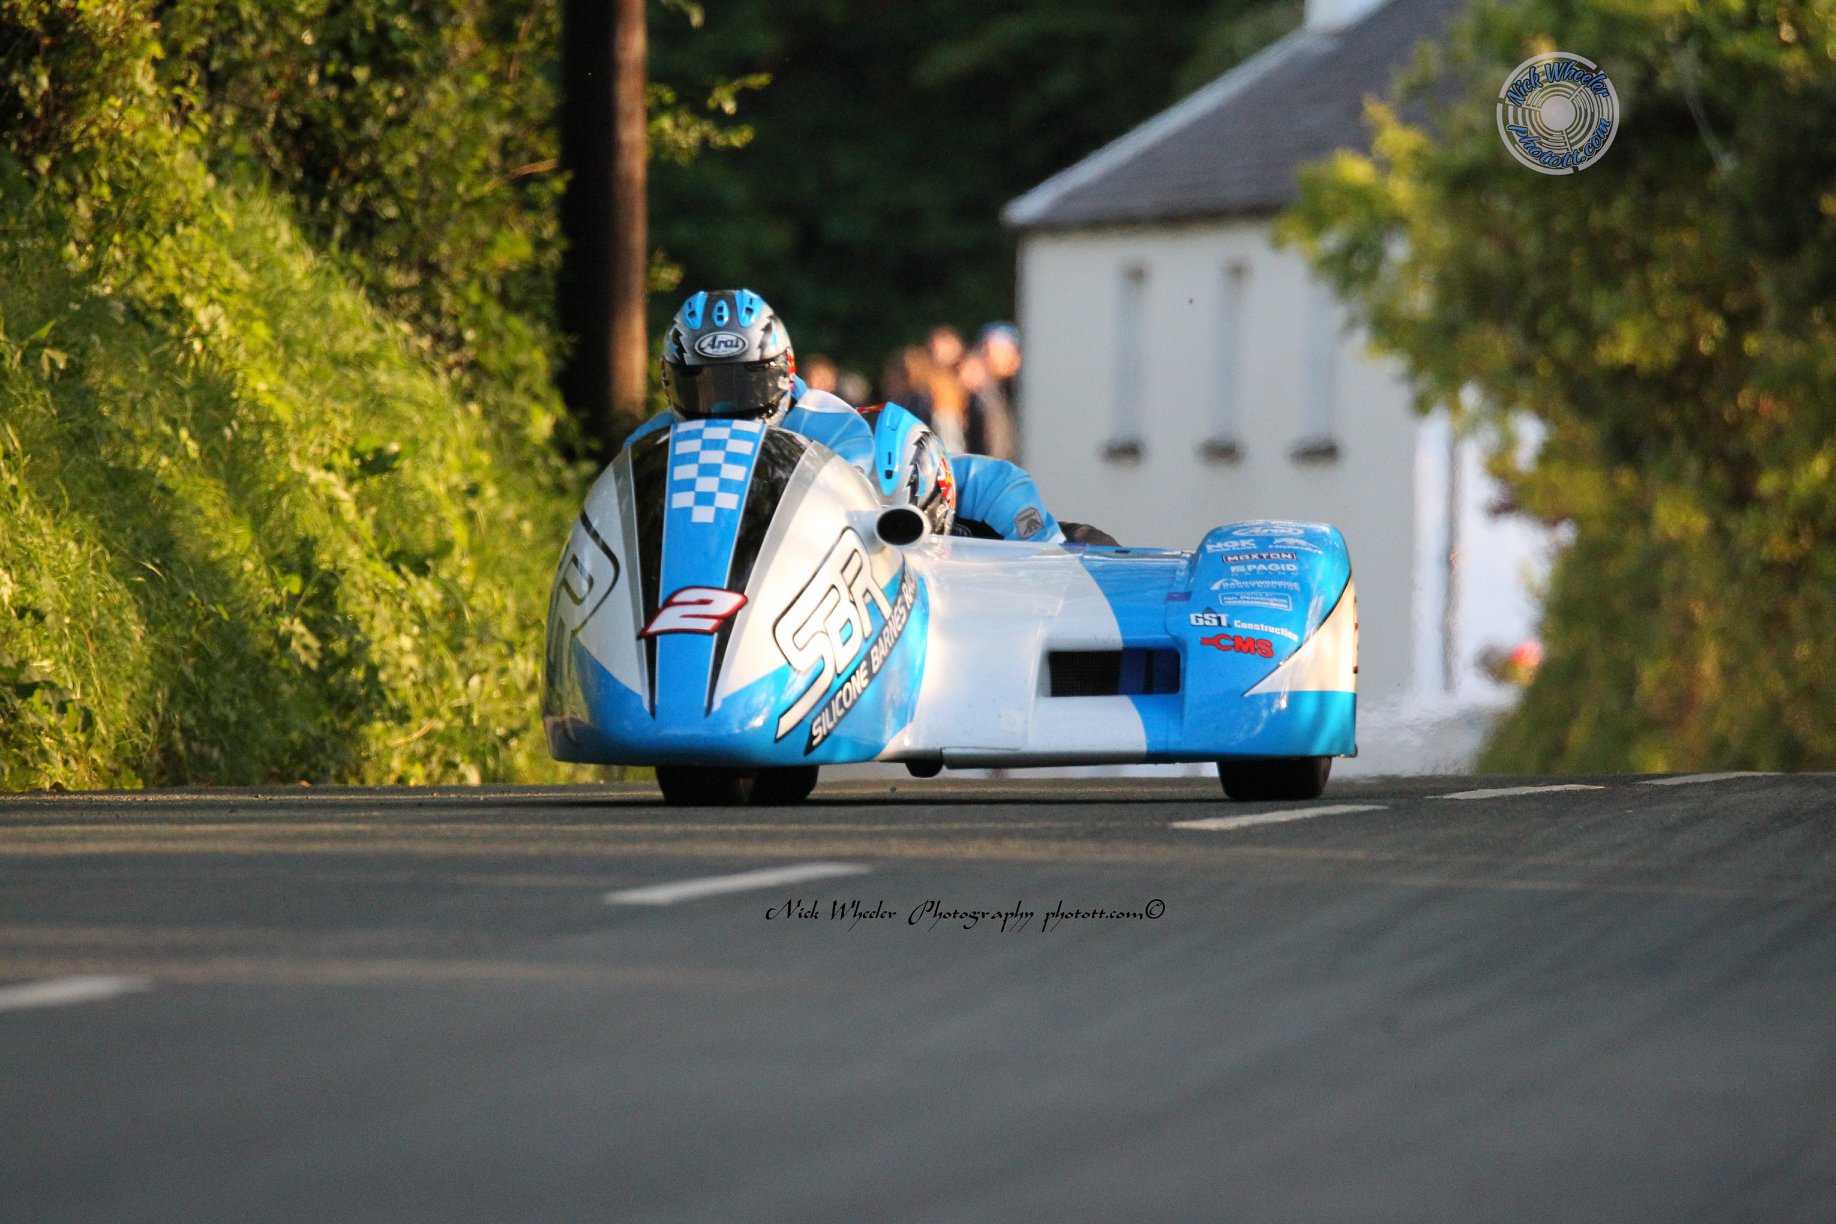 TT 2019: Holden/Cain, Birchall’s Show Class In Sunday Afternoon’s Sidecar Practice Stint